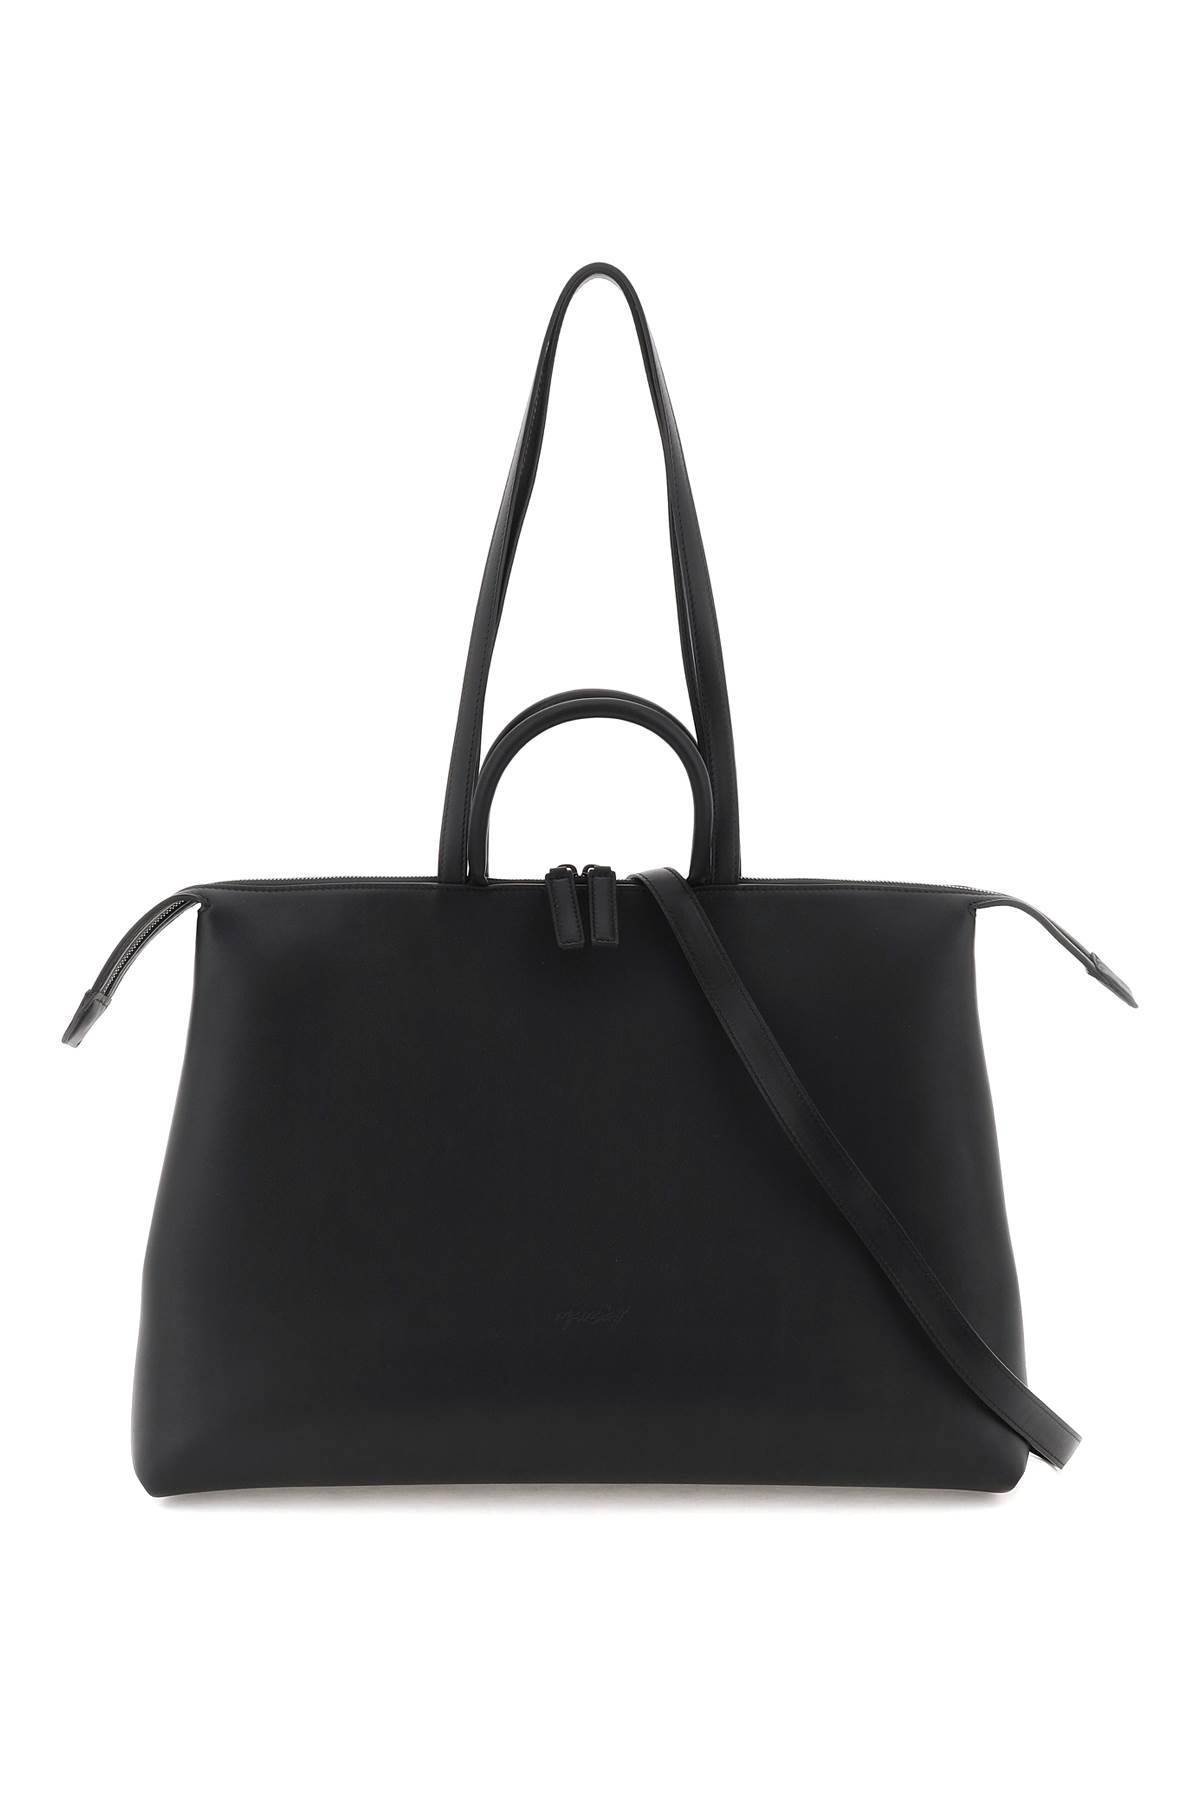 Marsèll MARSELL '4 in orizzontale' shoulder bag